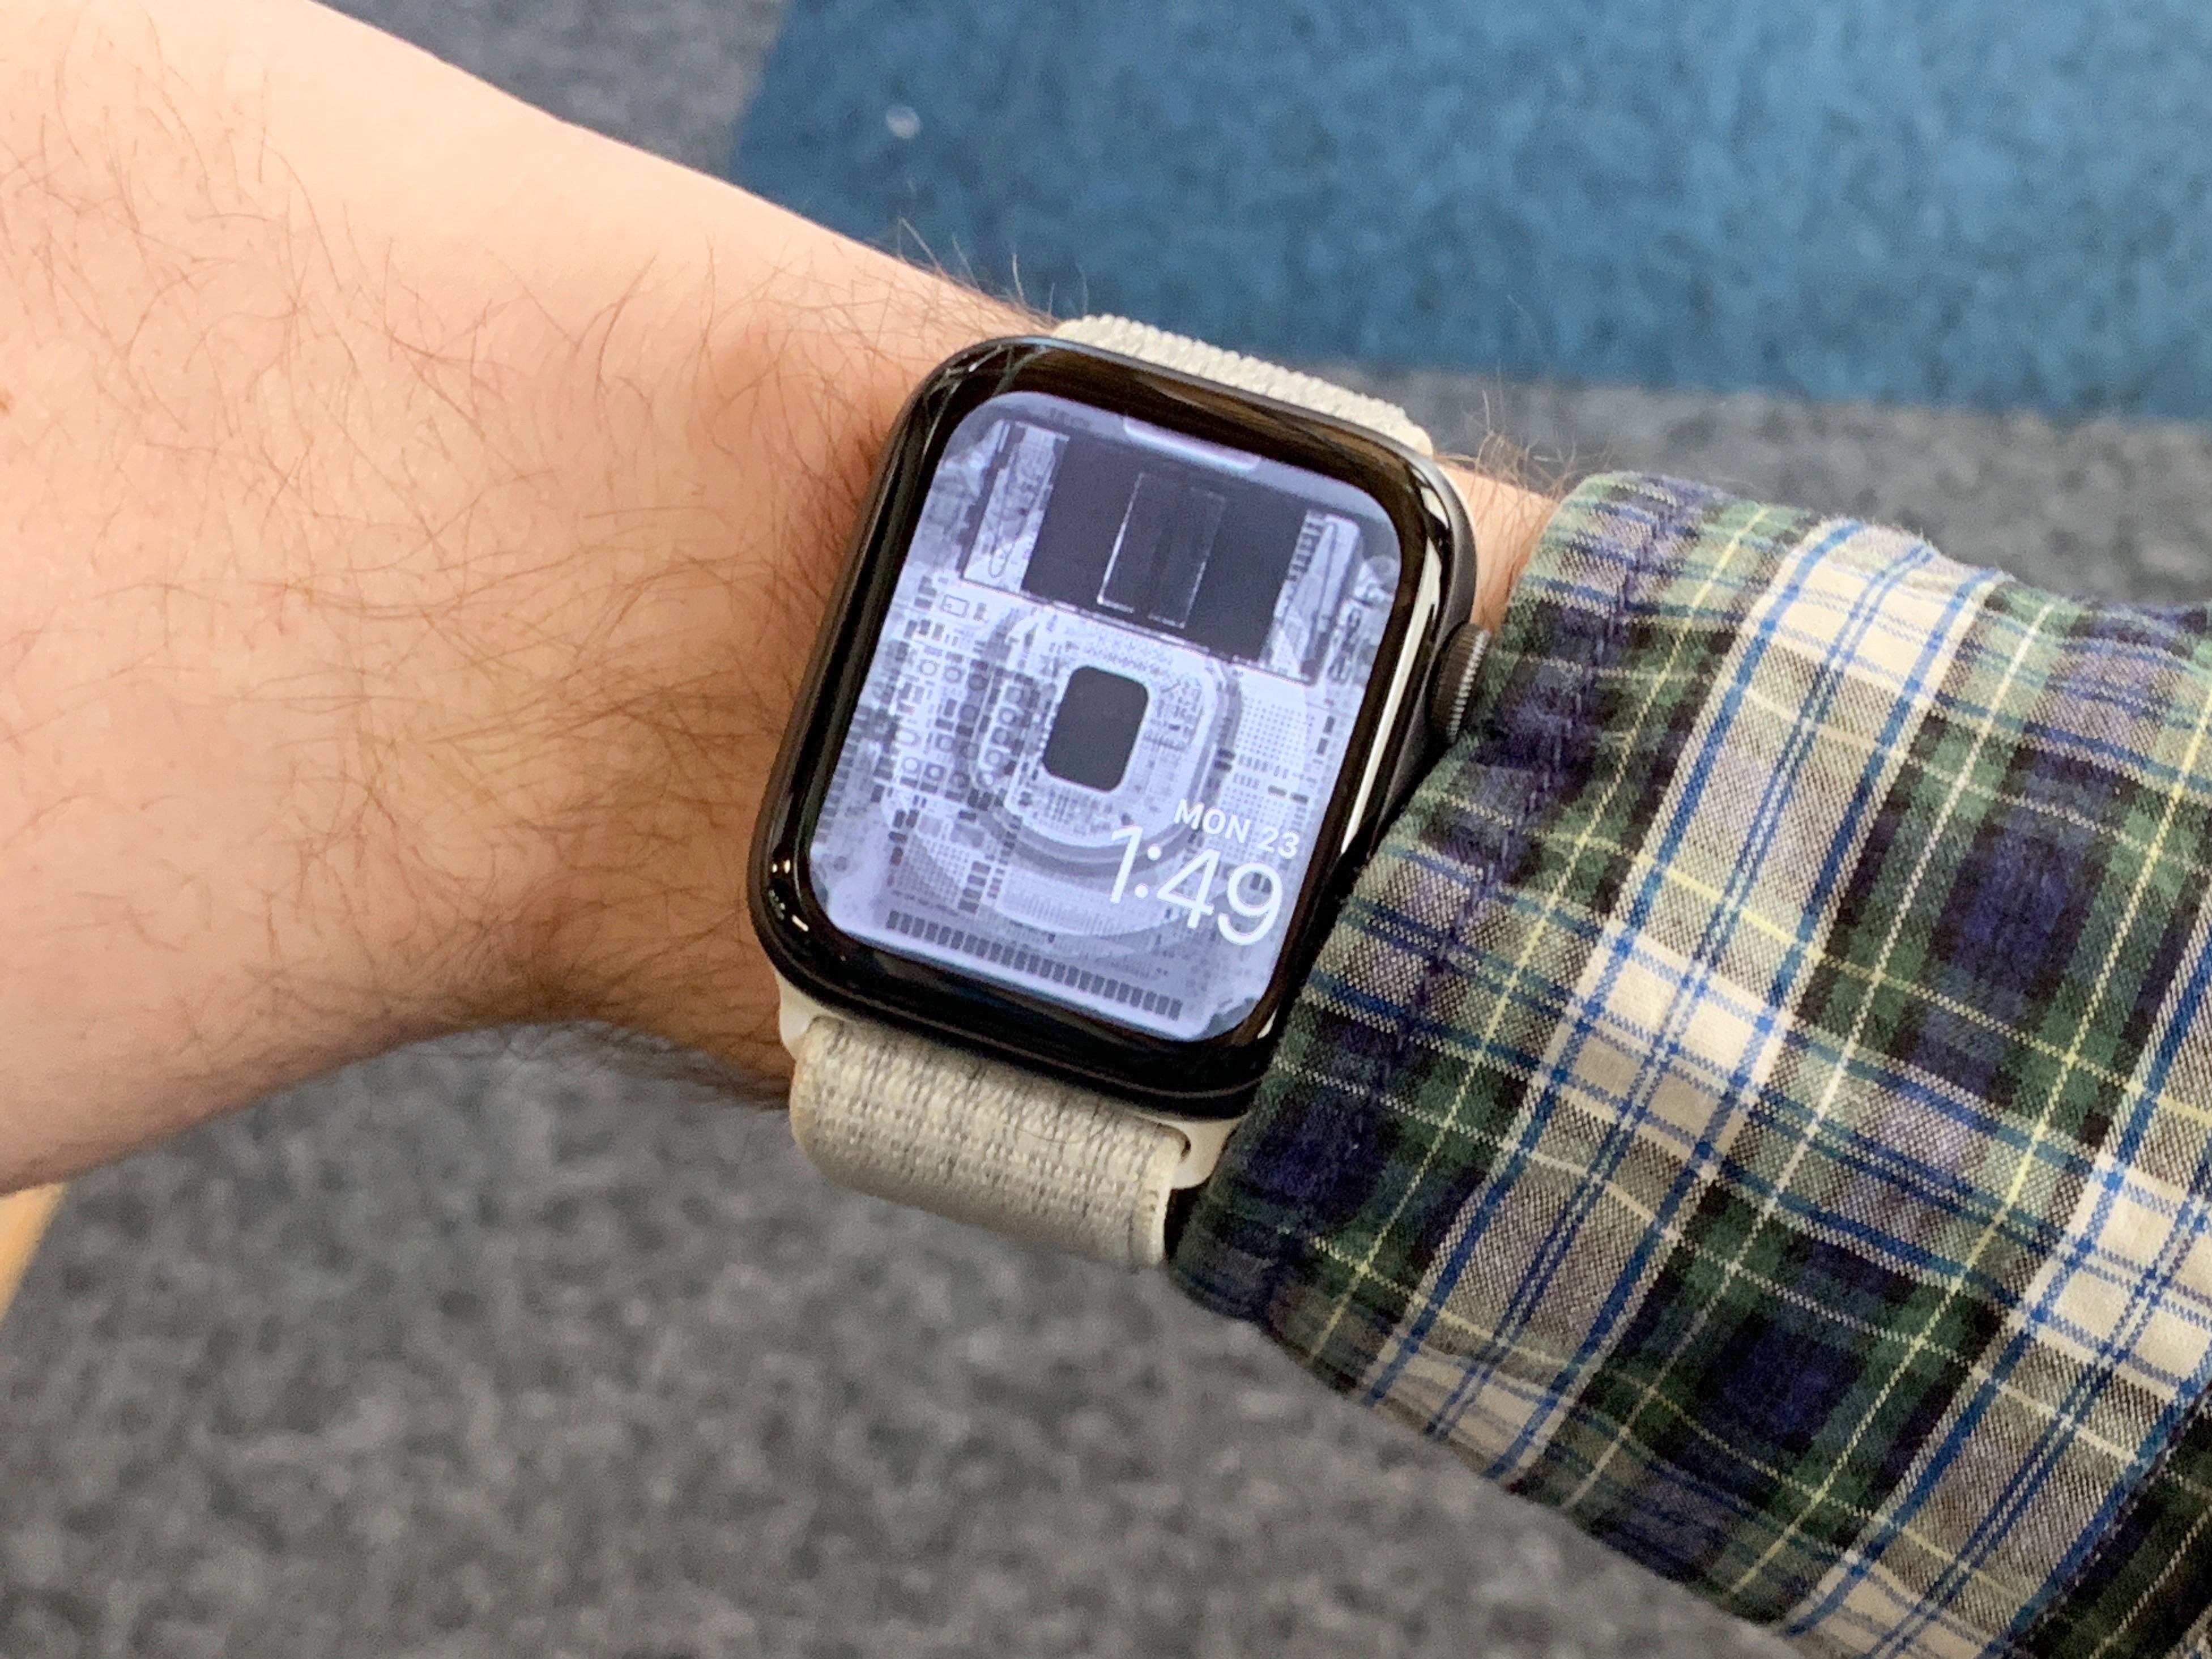 How To Use Your Own Photos As Apple Watch Wallpaper Ifixit